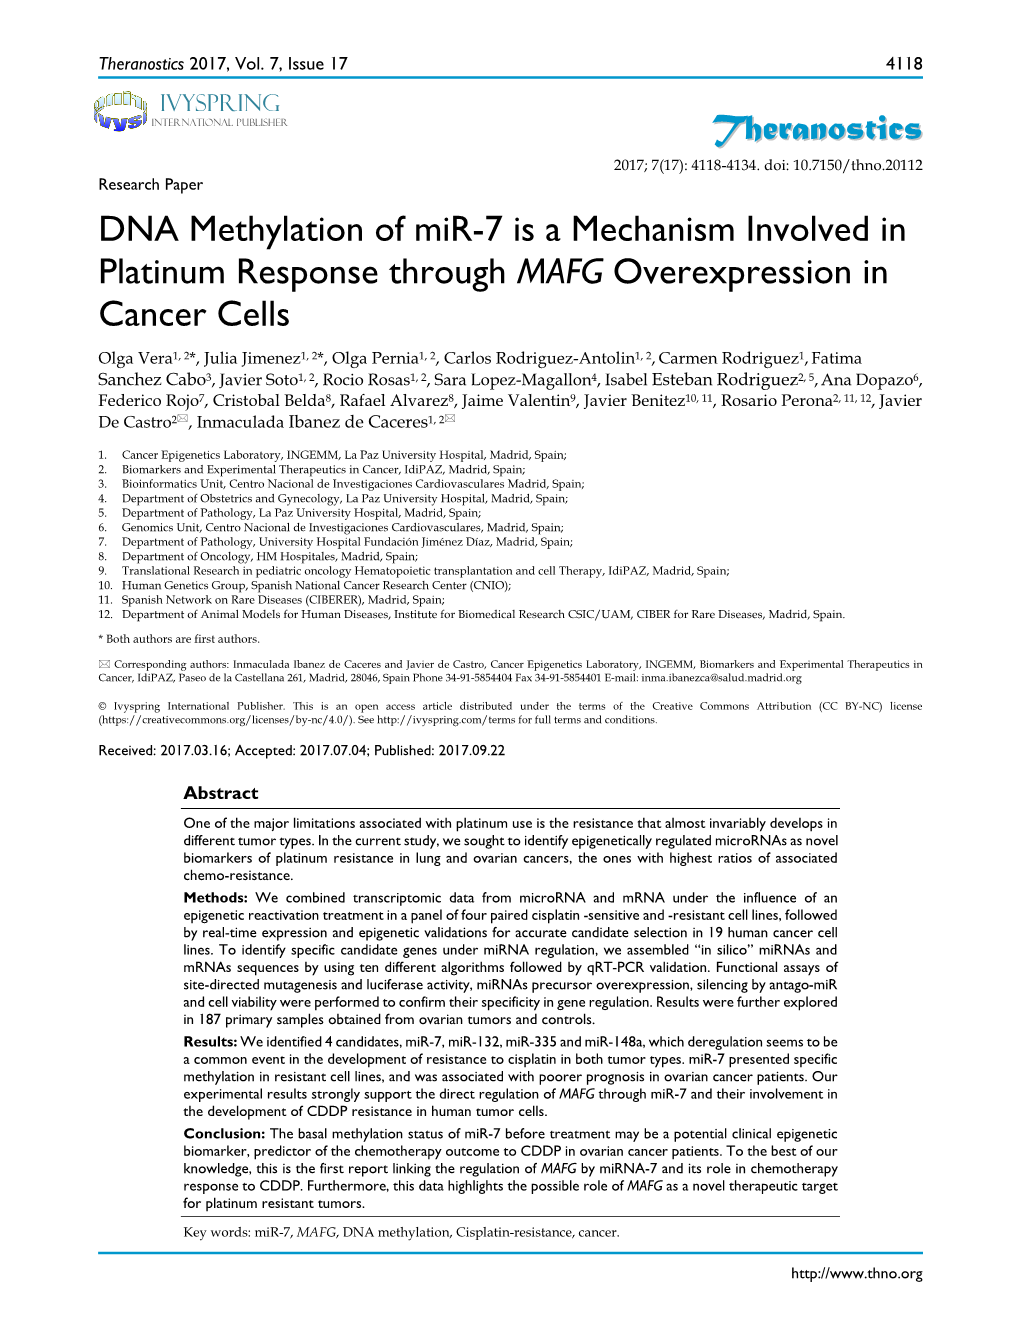 Theranostics DNA Methylation of Mir-7 Is a Mechanism Involved In